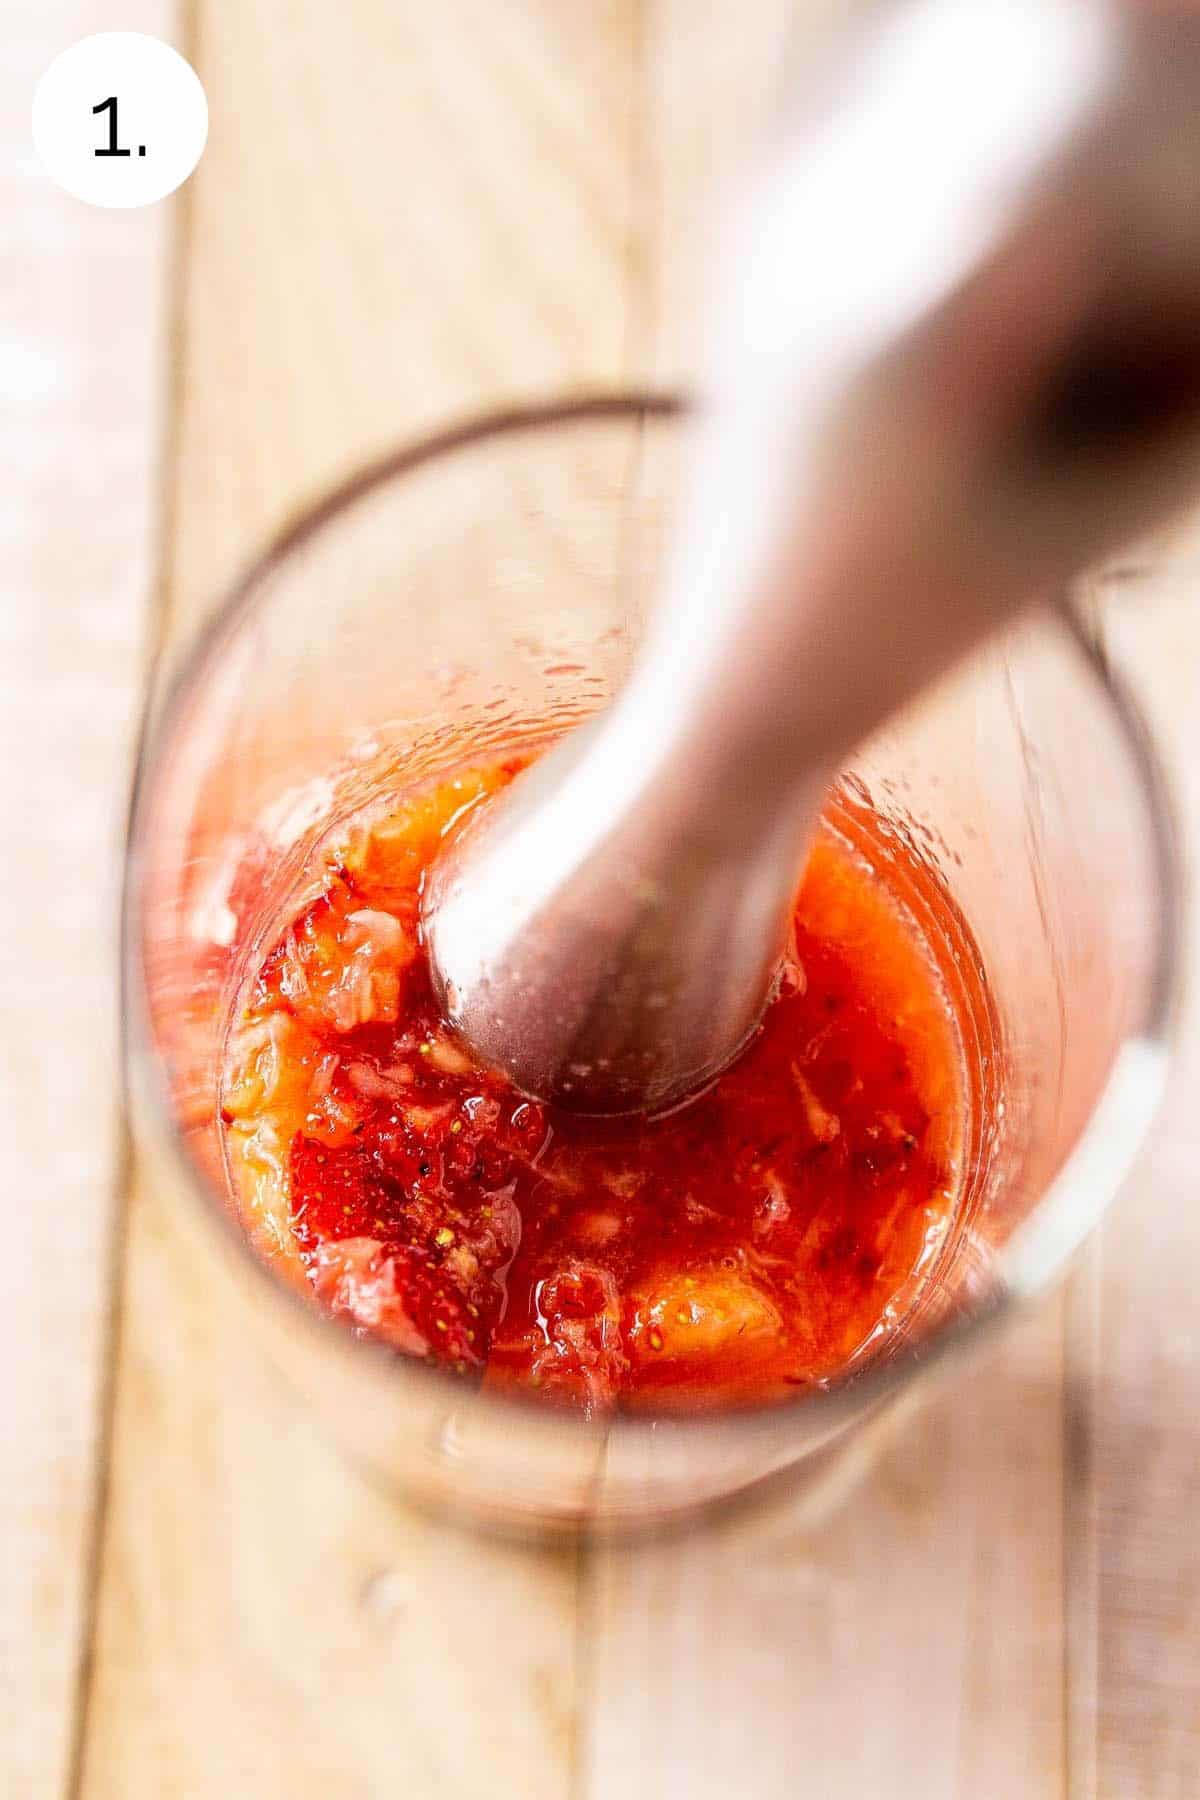 Muddling the strawberries in the highball glass until they break down and turn juicy.